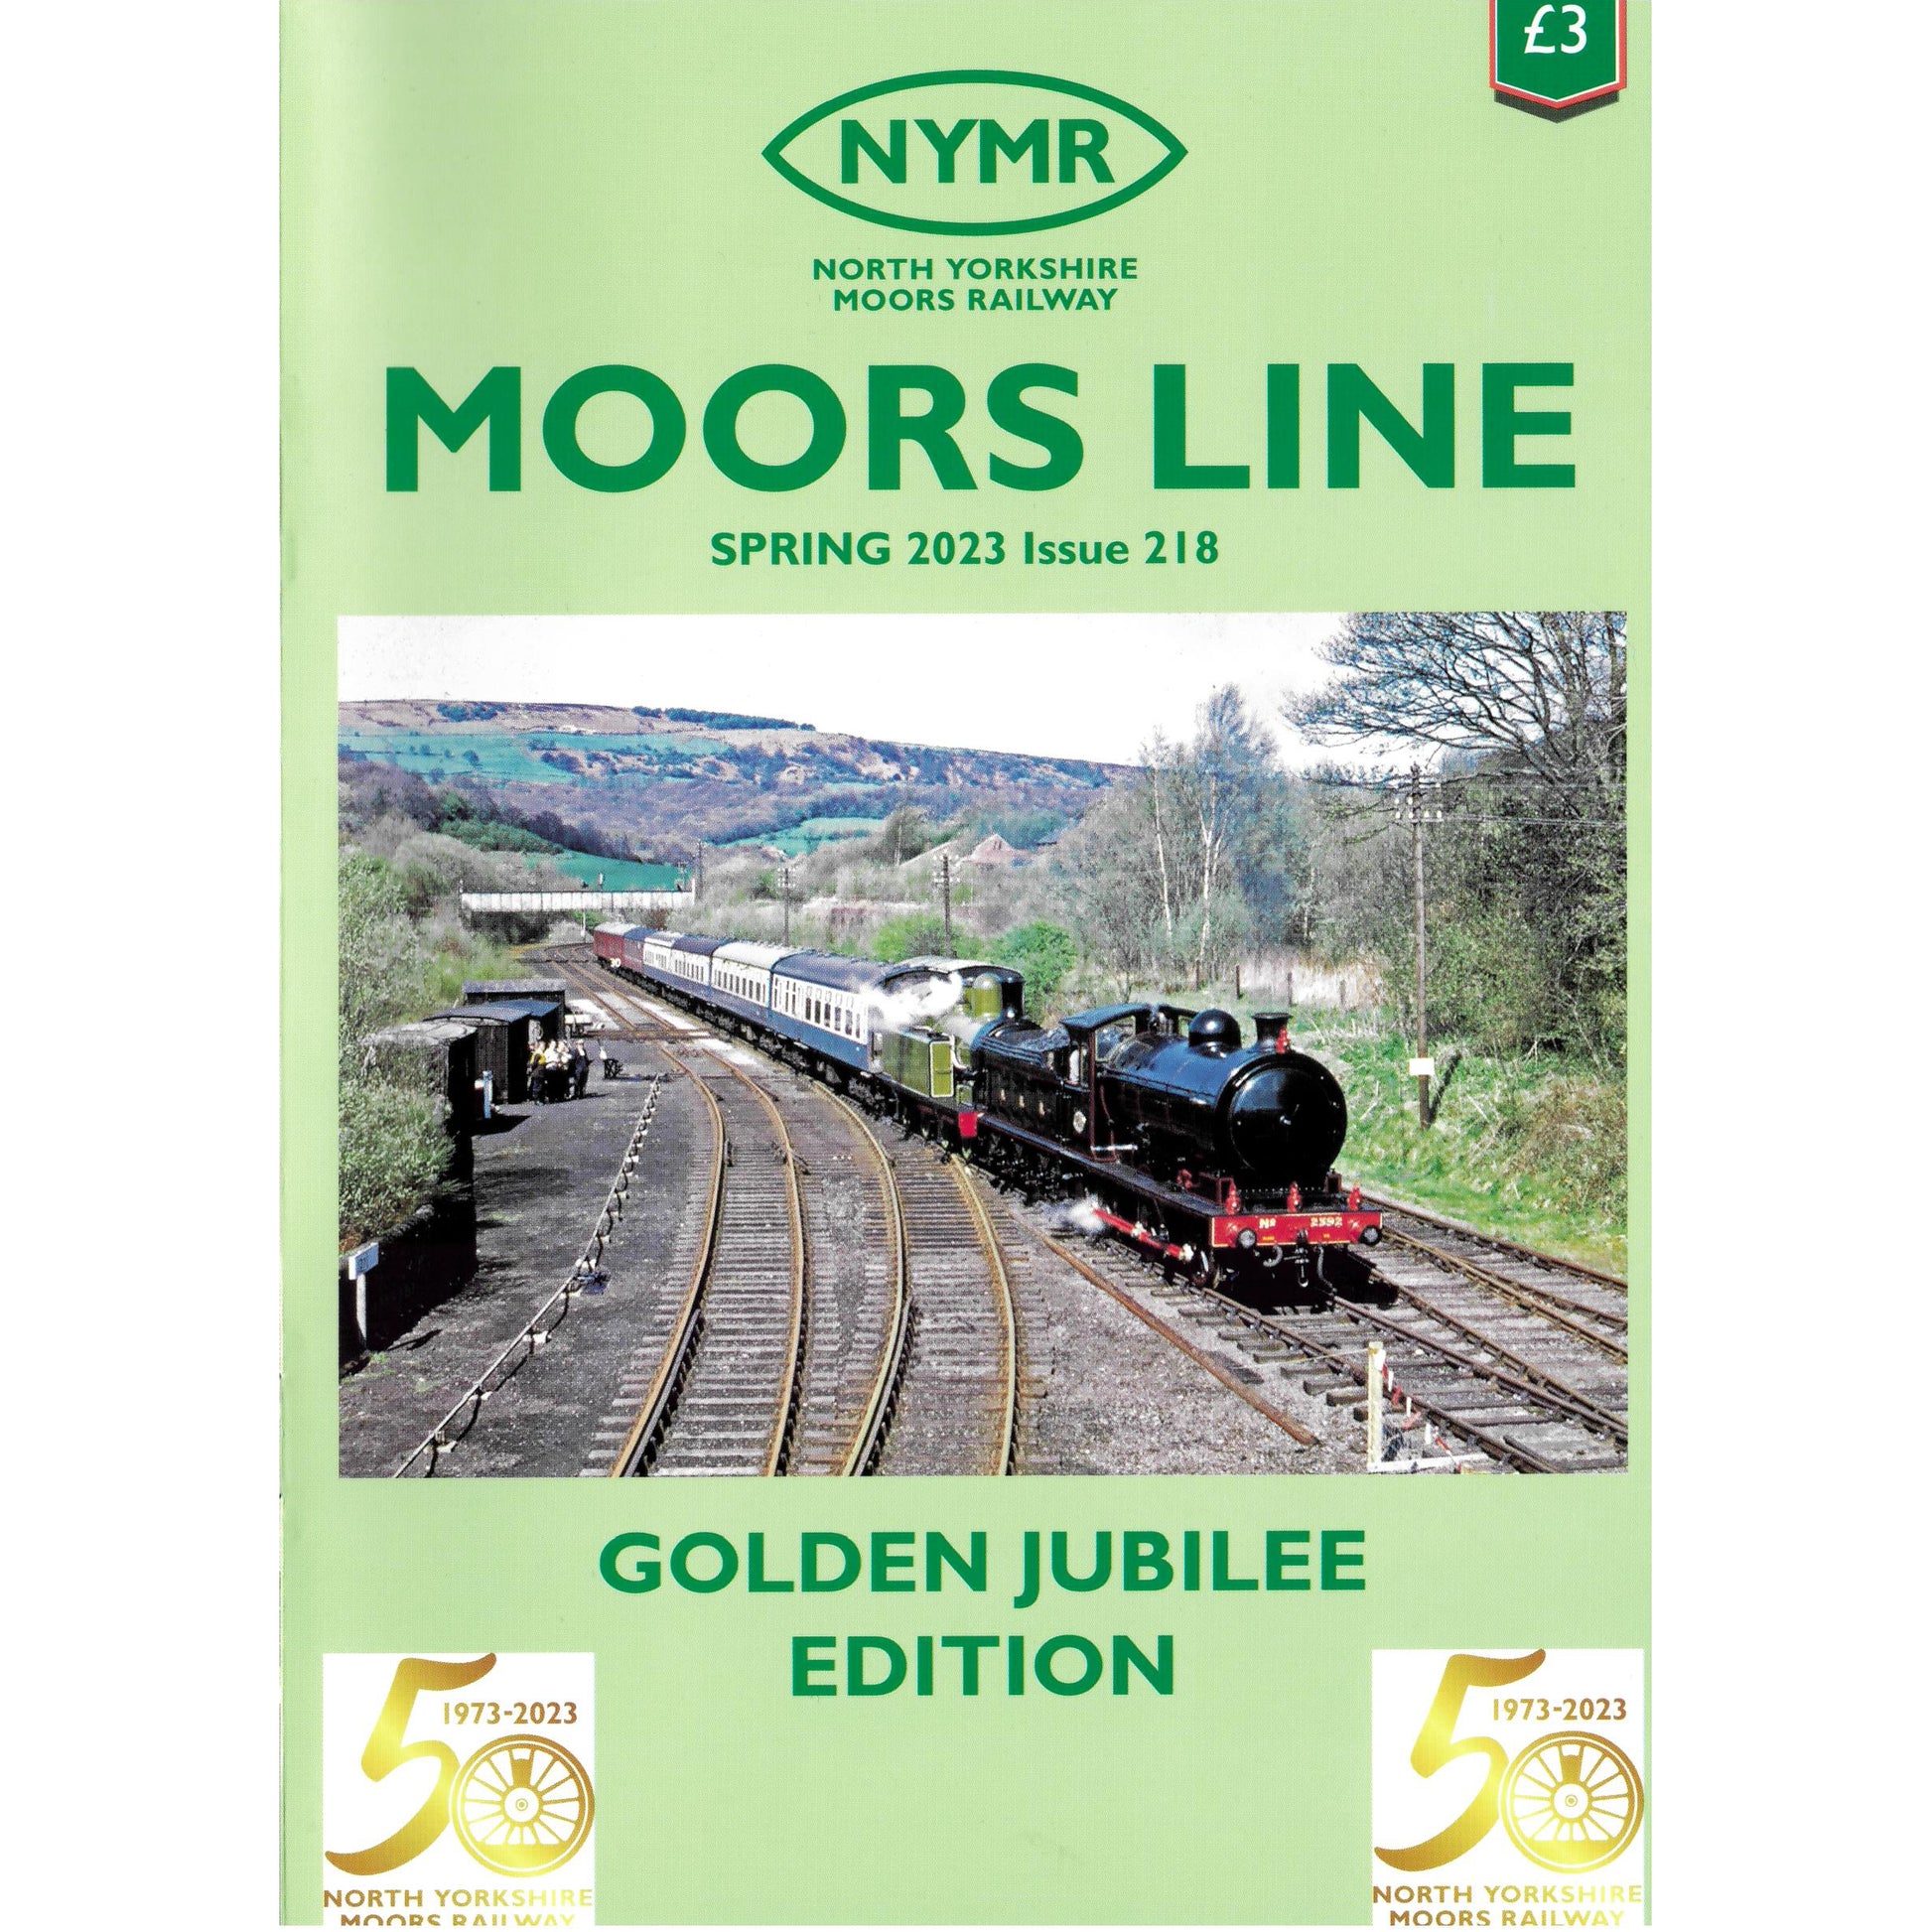 The Moors Line magazine featuring a vintage shot of the train used for the Royal  re-opening of the railway in 1973